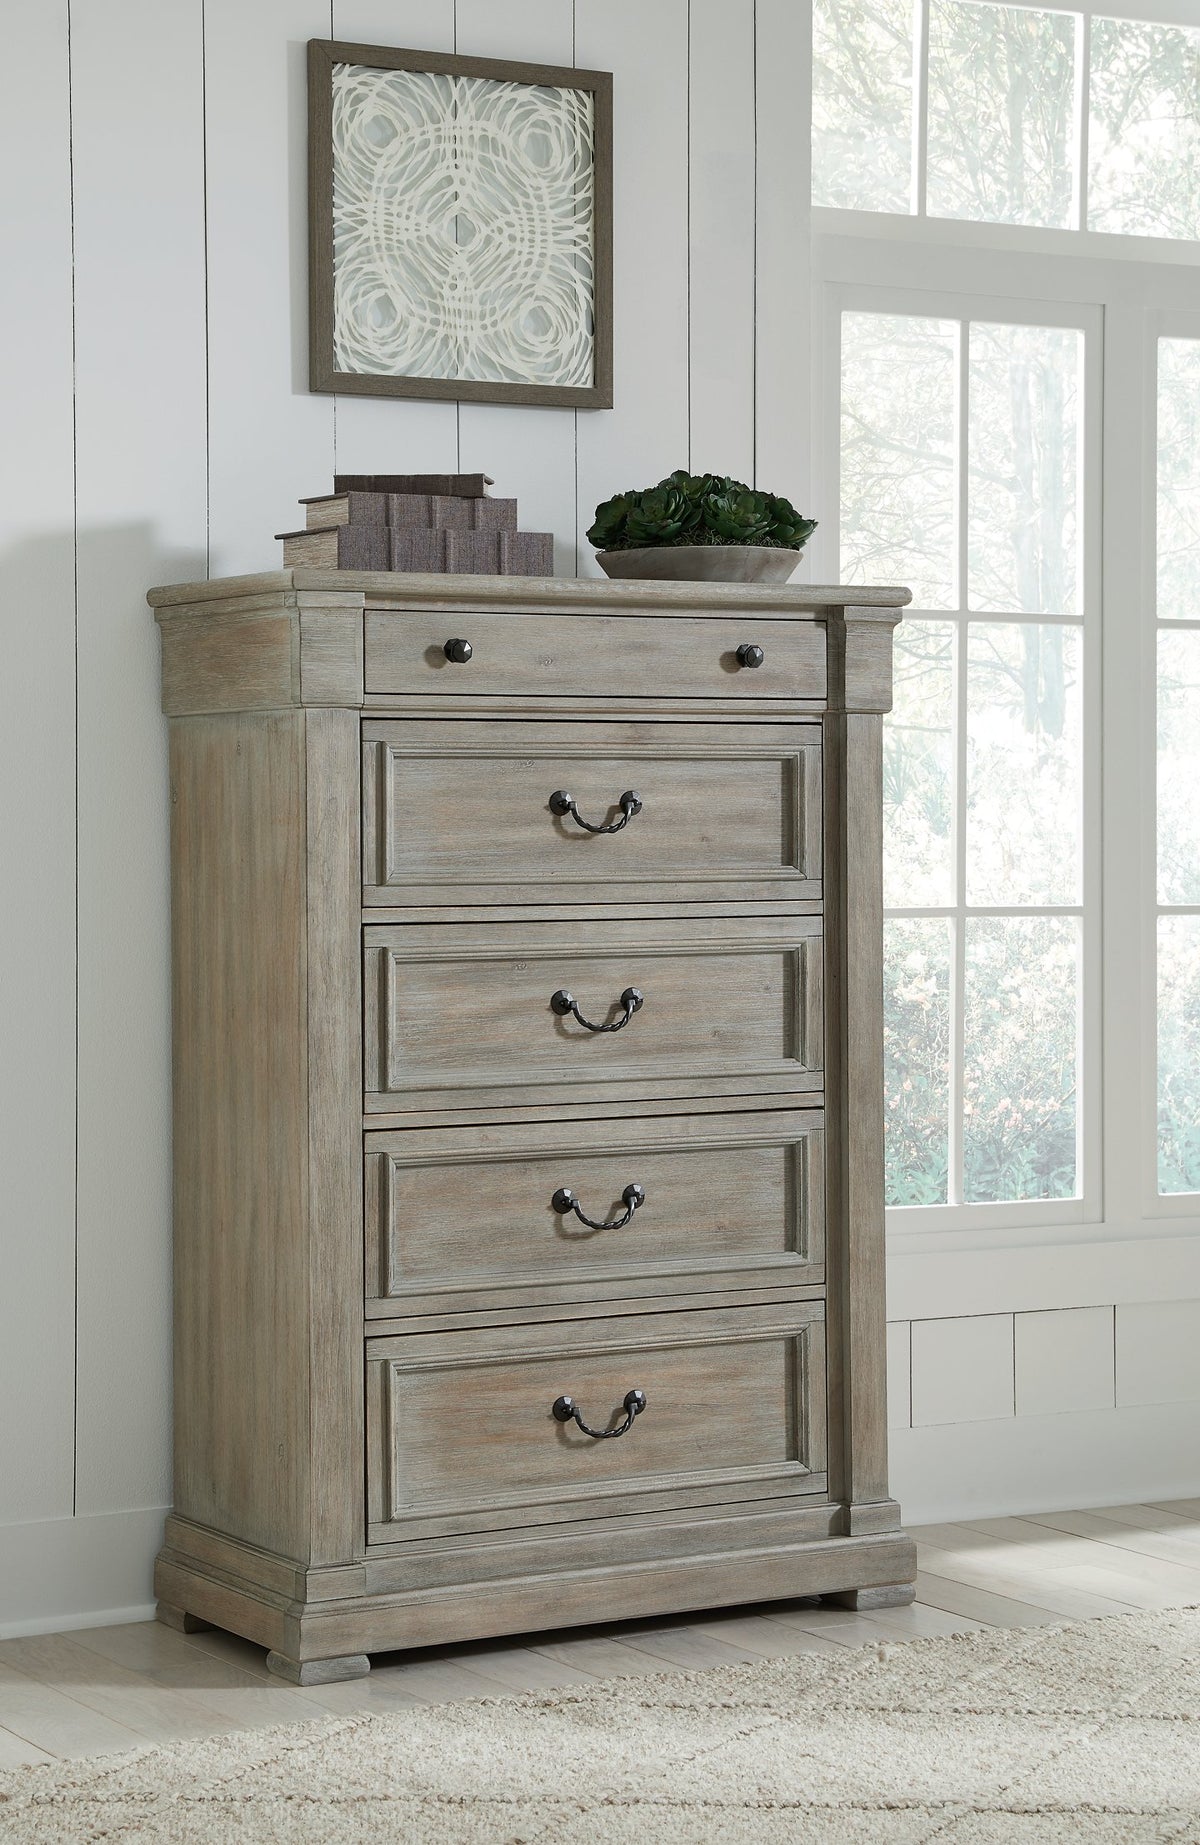 Moreshire Chest of Drawers - Half Price Furniture